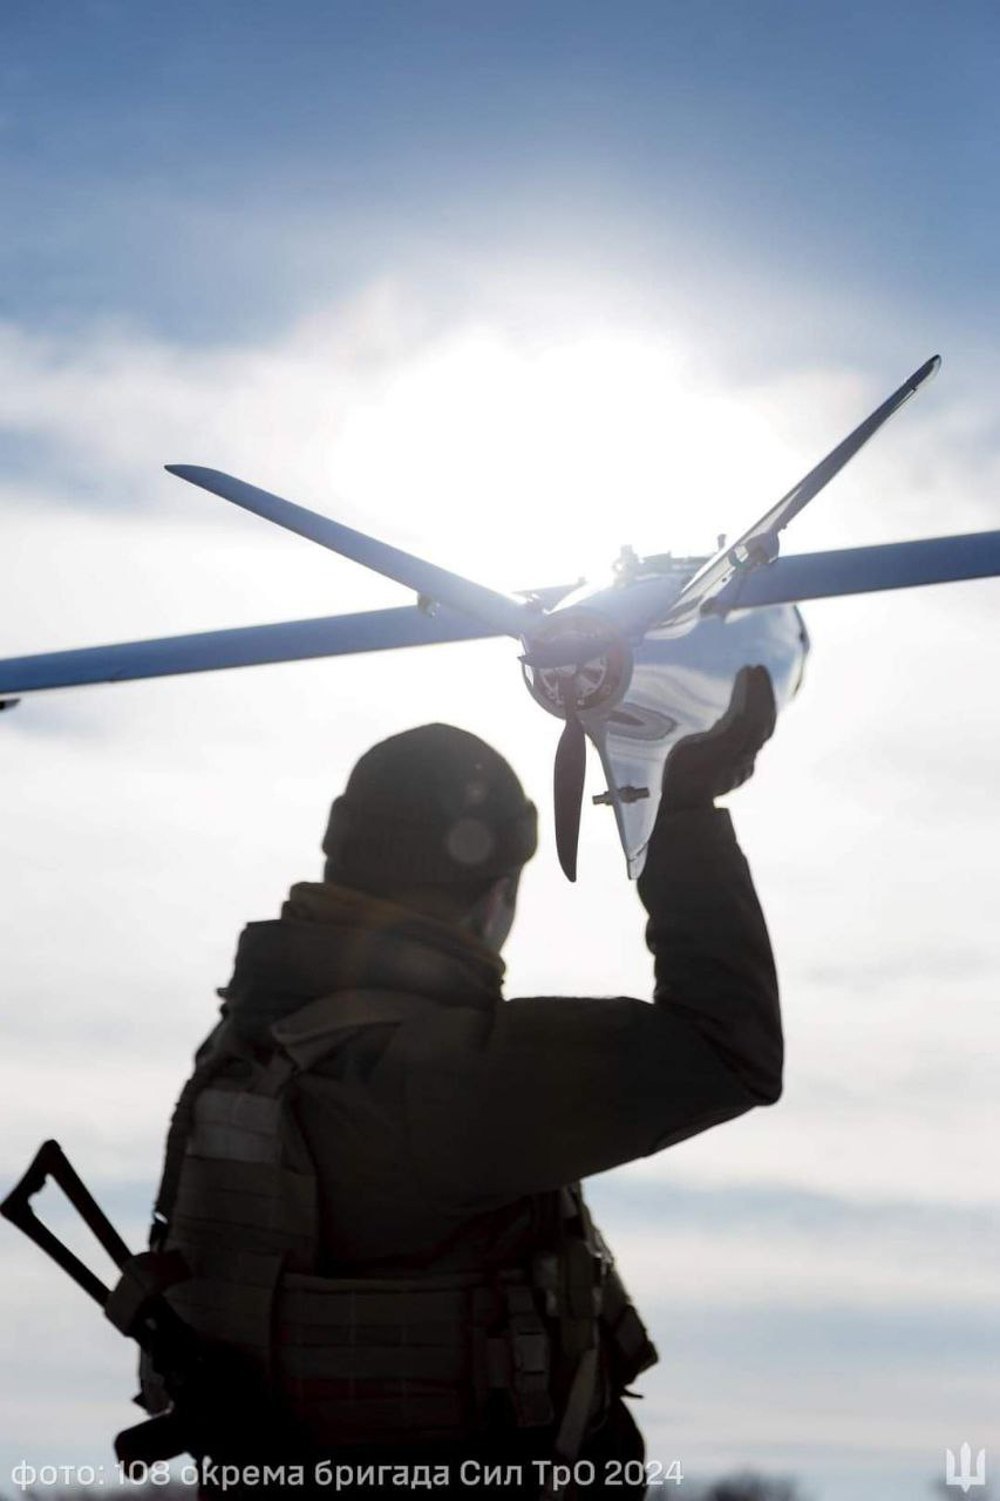 A soldier of the 108th Separate Brigade of the Ukrainian Territorial Defence Forces launches a Ukrainian reconnaissance drone Leleka 